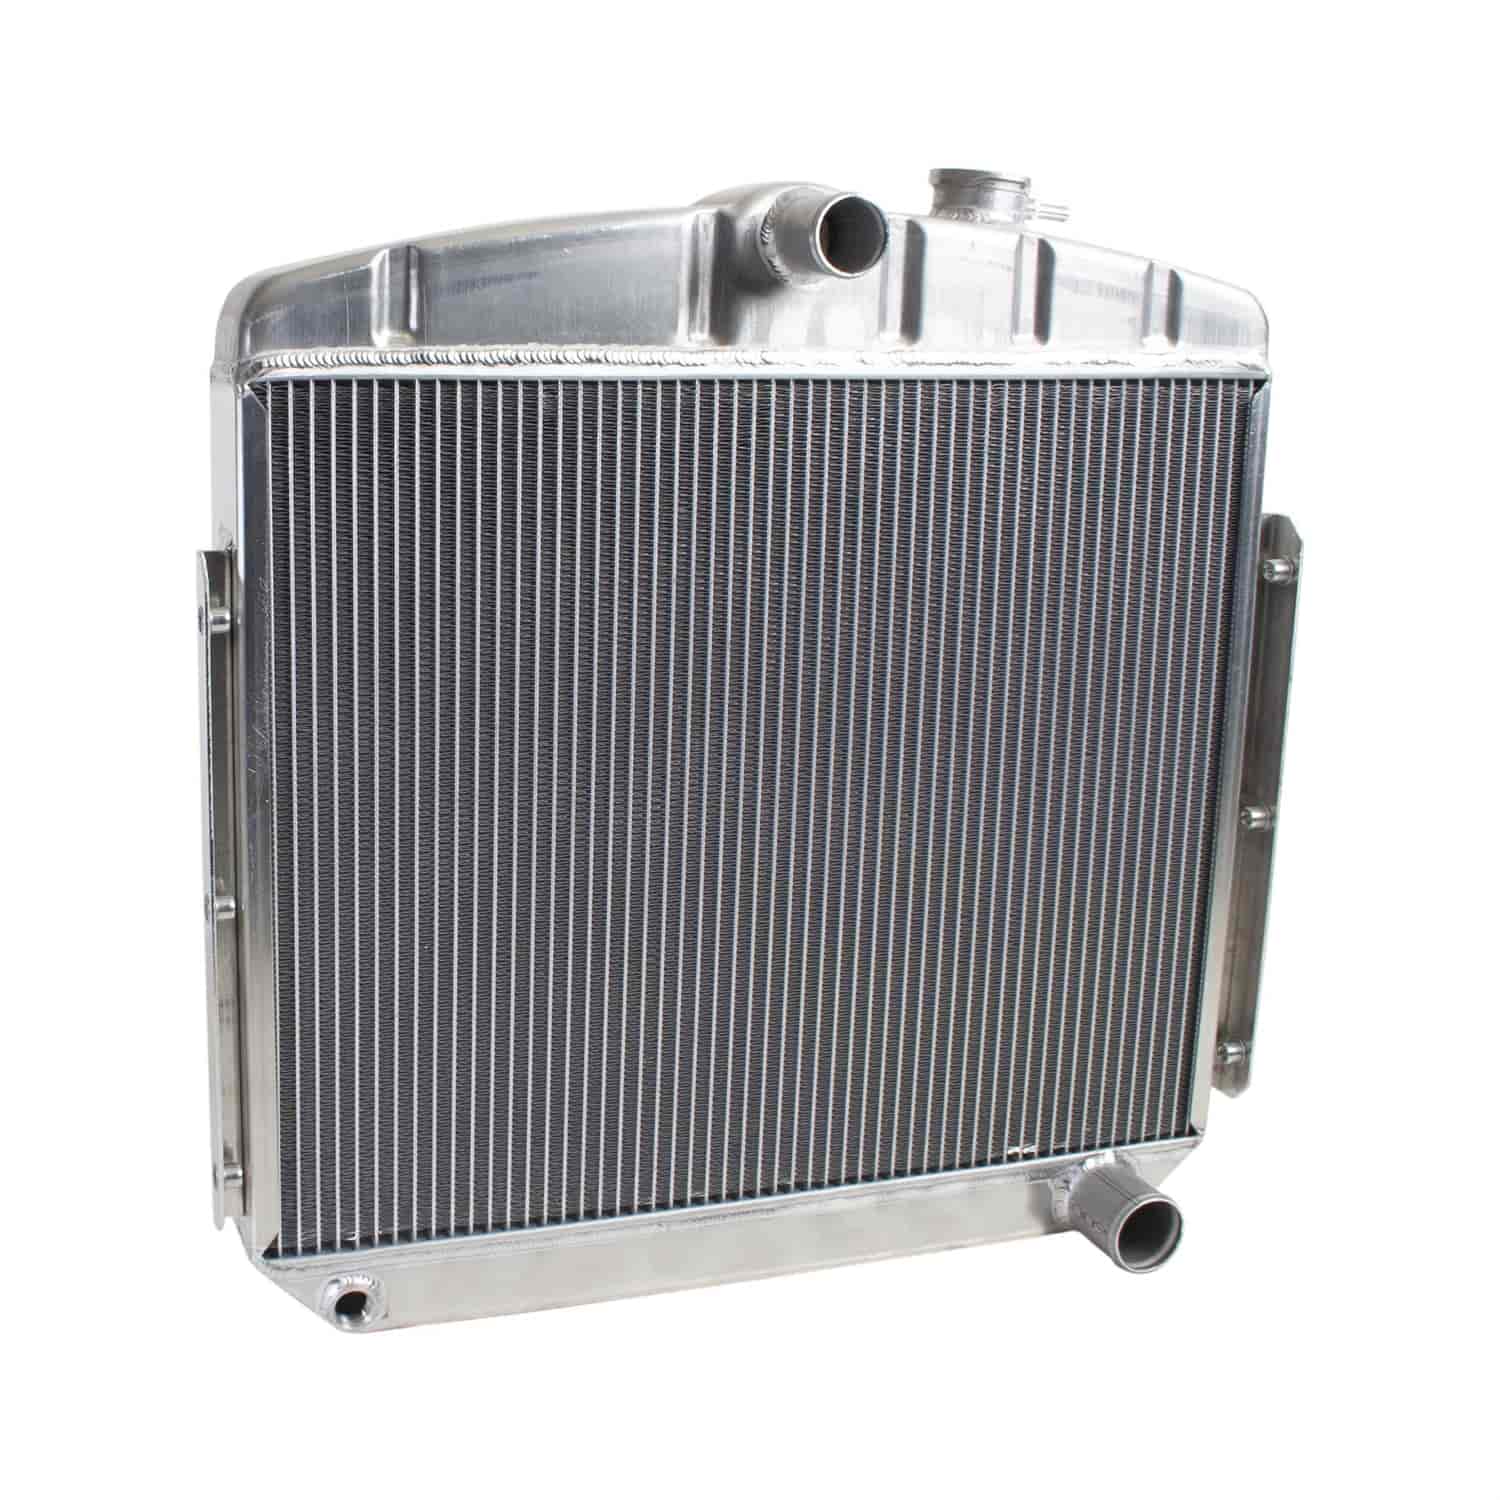 ExactFit Radiator for 1955-1956 Chevrolet Car for Chevy L6 Mount